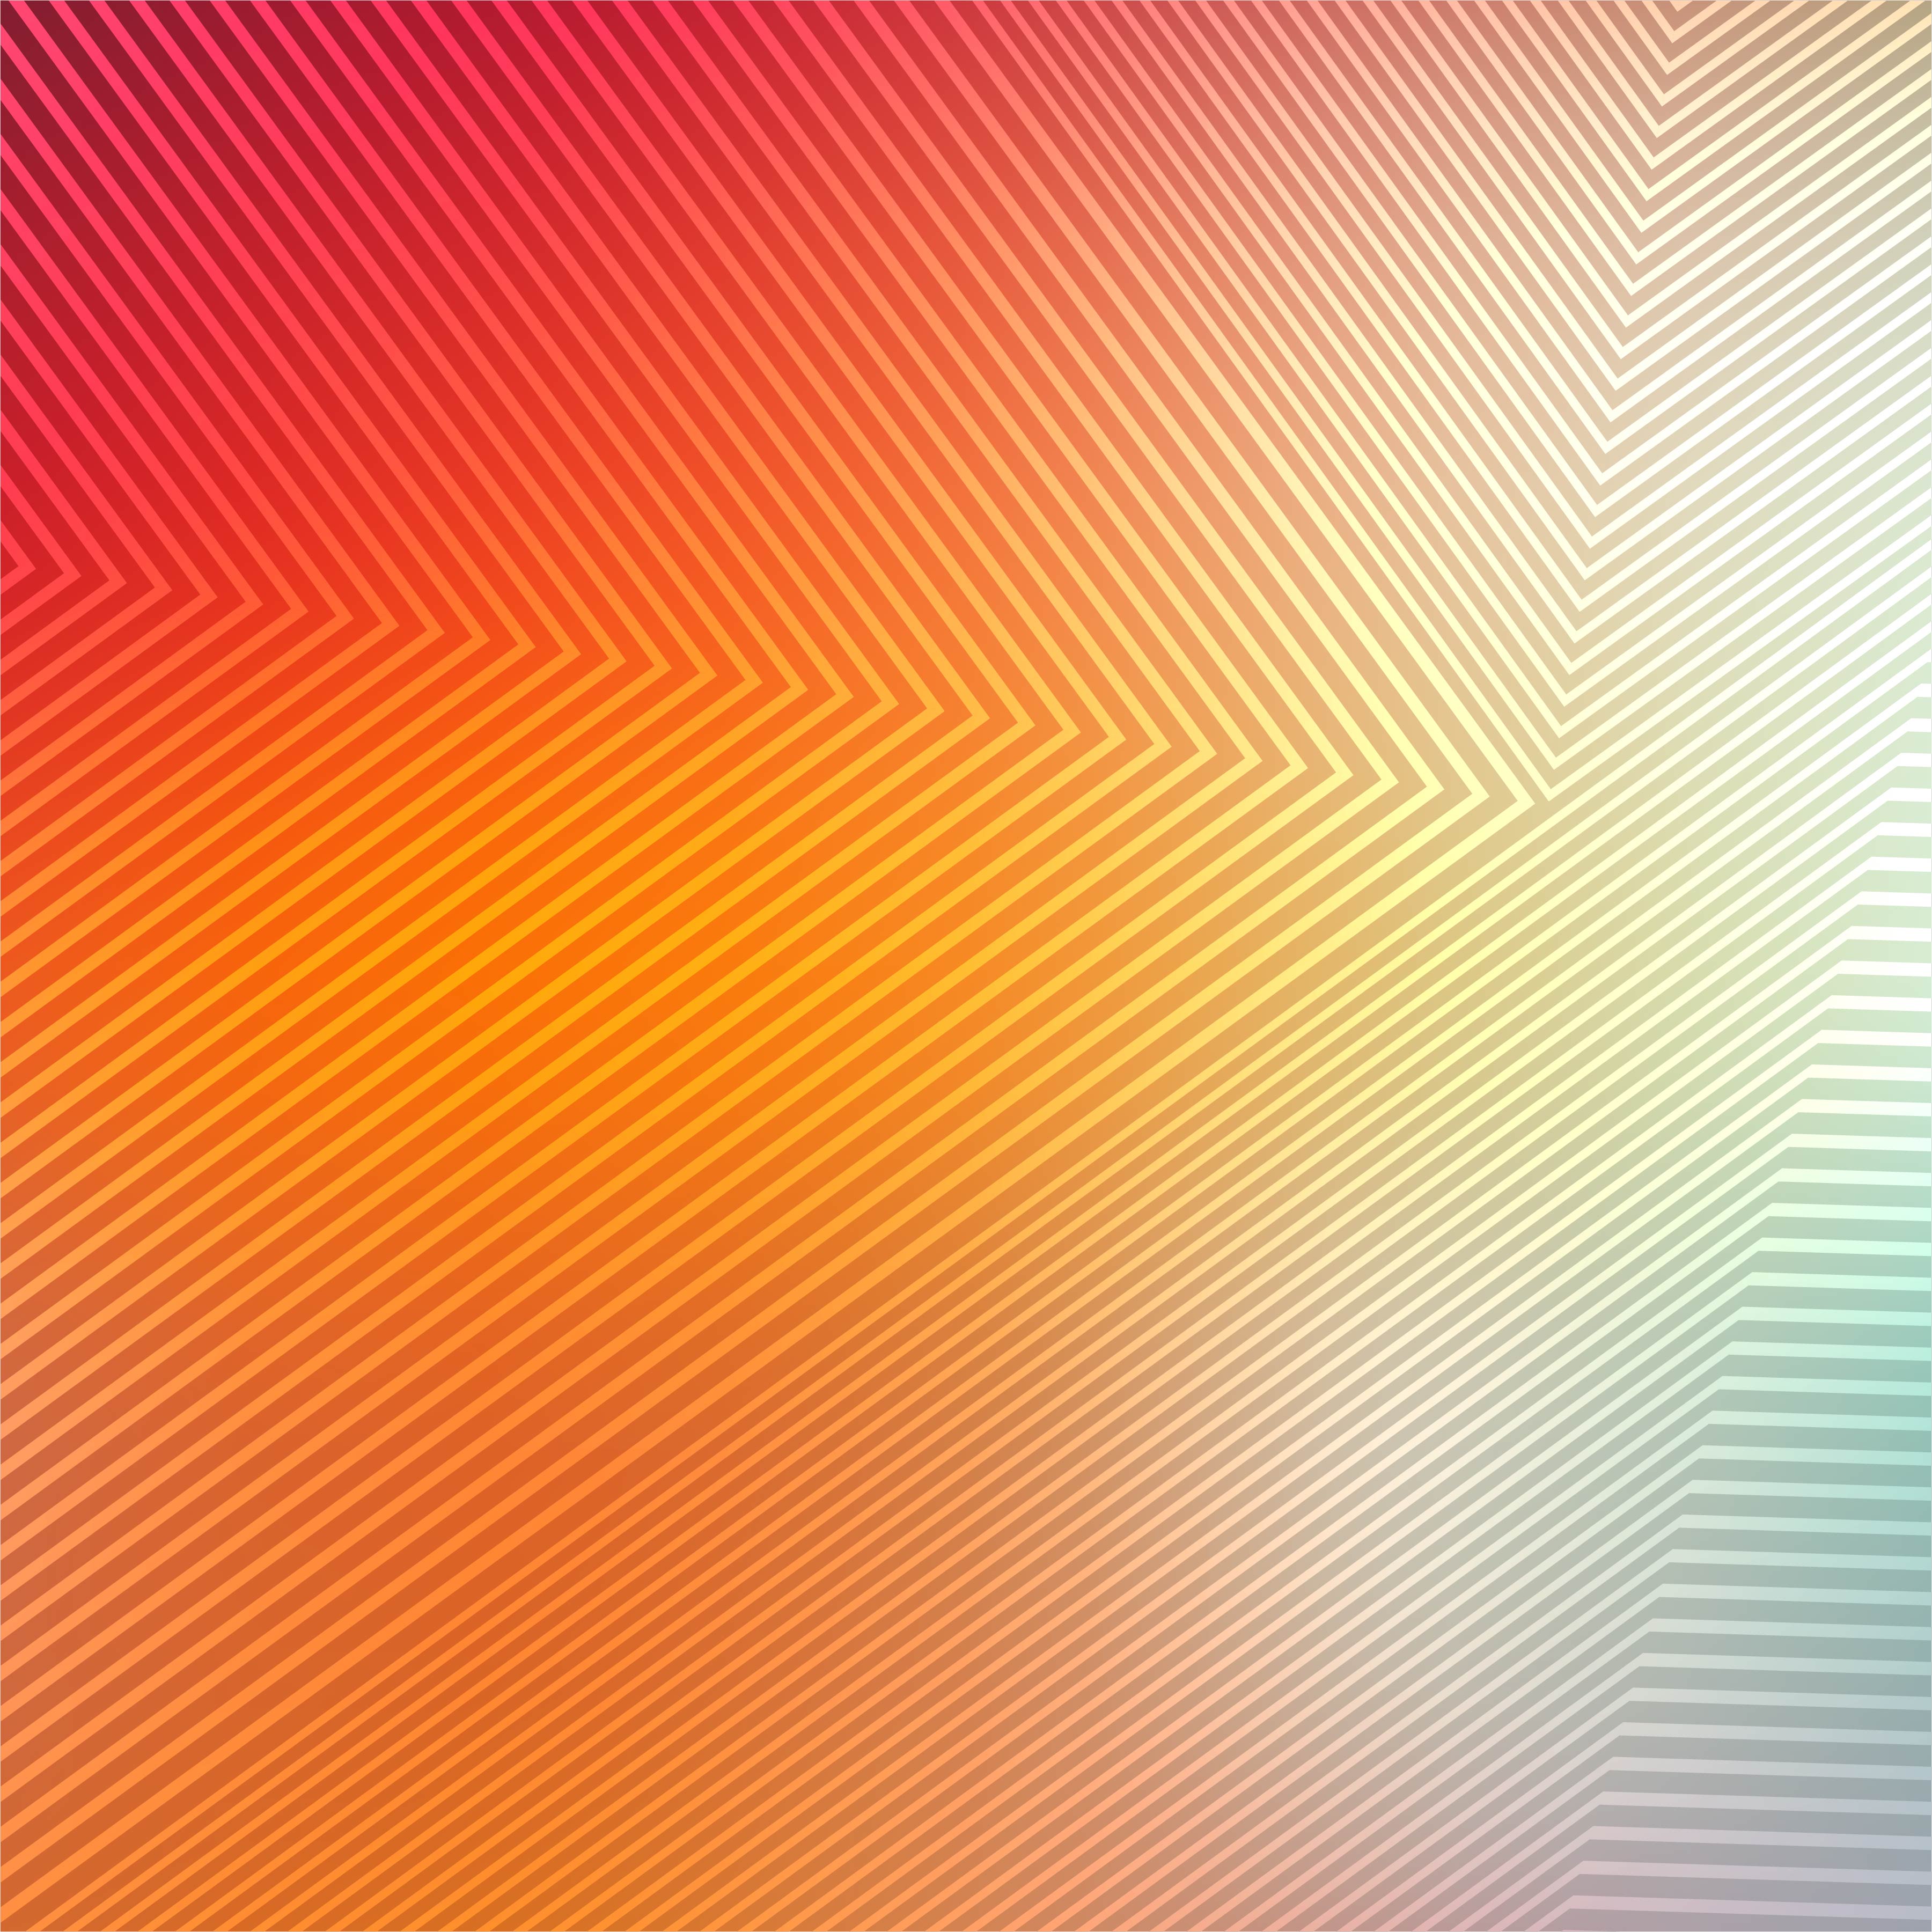 Abstract Colorful Geometric Lines Background Illustration Vector 258838